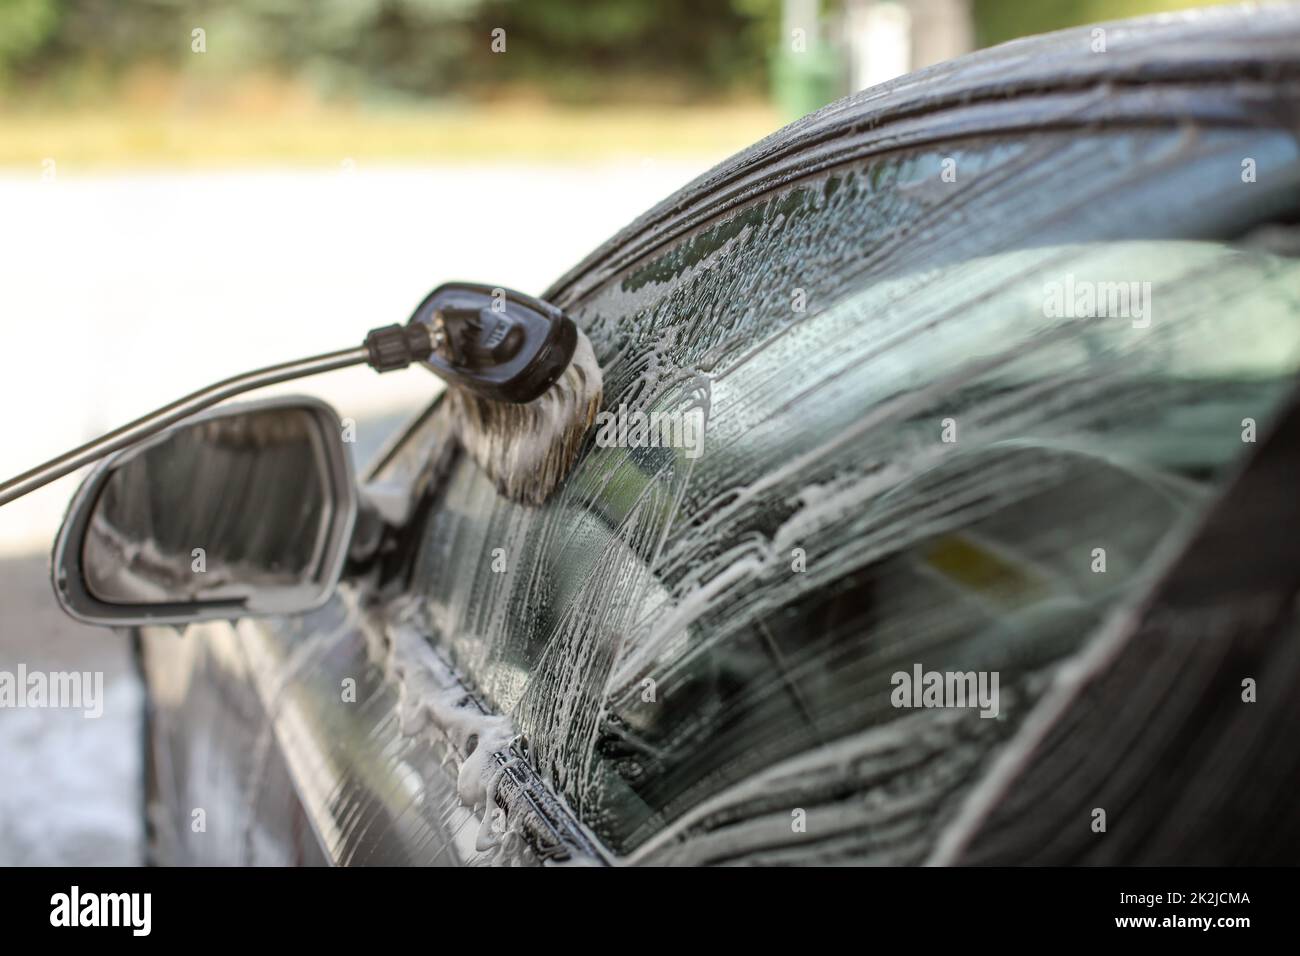 Side of a car washed in self serve carwash. Brush cleaning glass, strokes visible in shampoo foam. Stock Photo